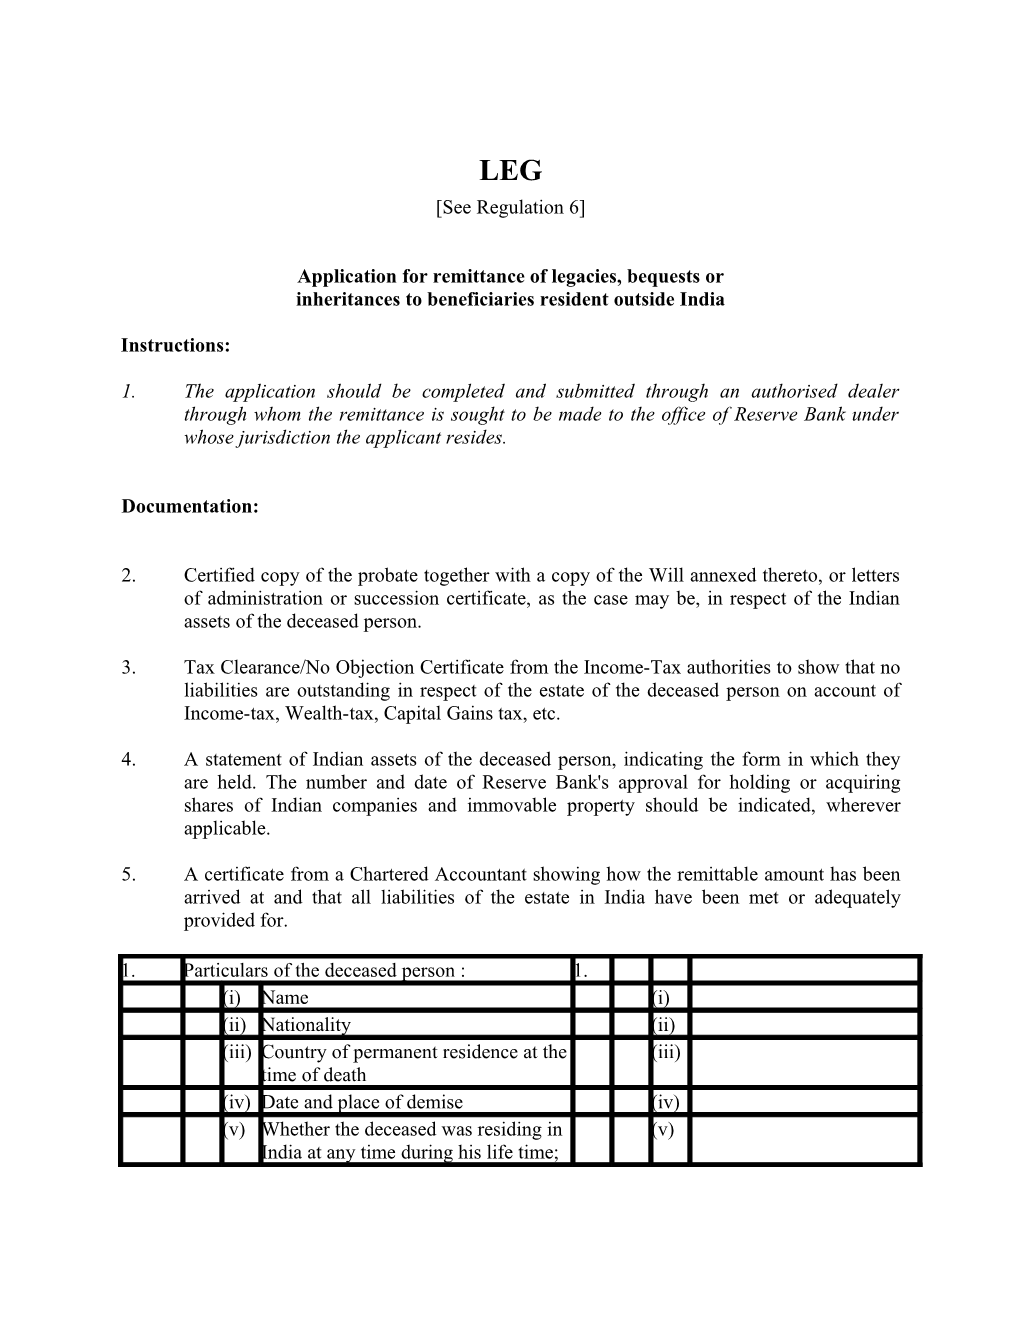 Application for Remittance of Legacies, Bequests Or Inheritances to Beneficiaries Resident